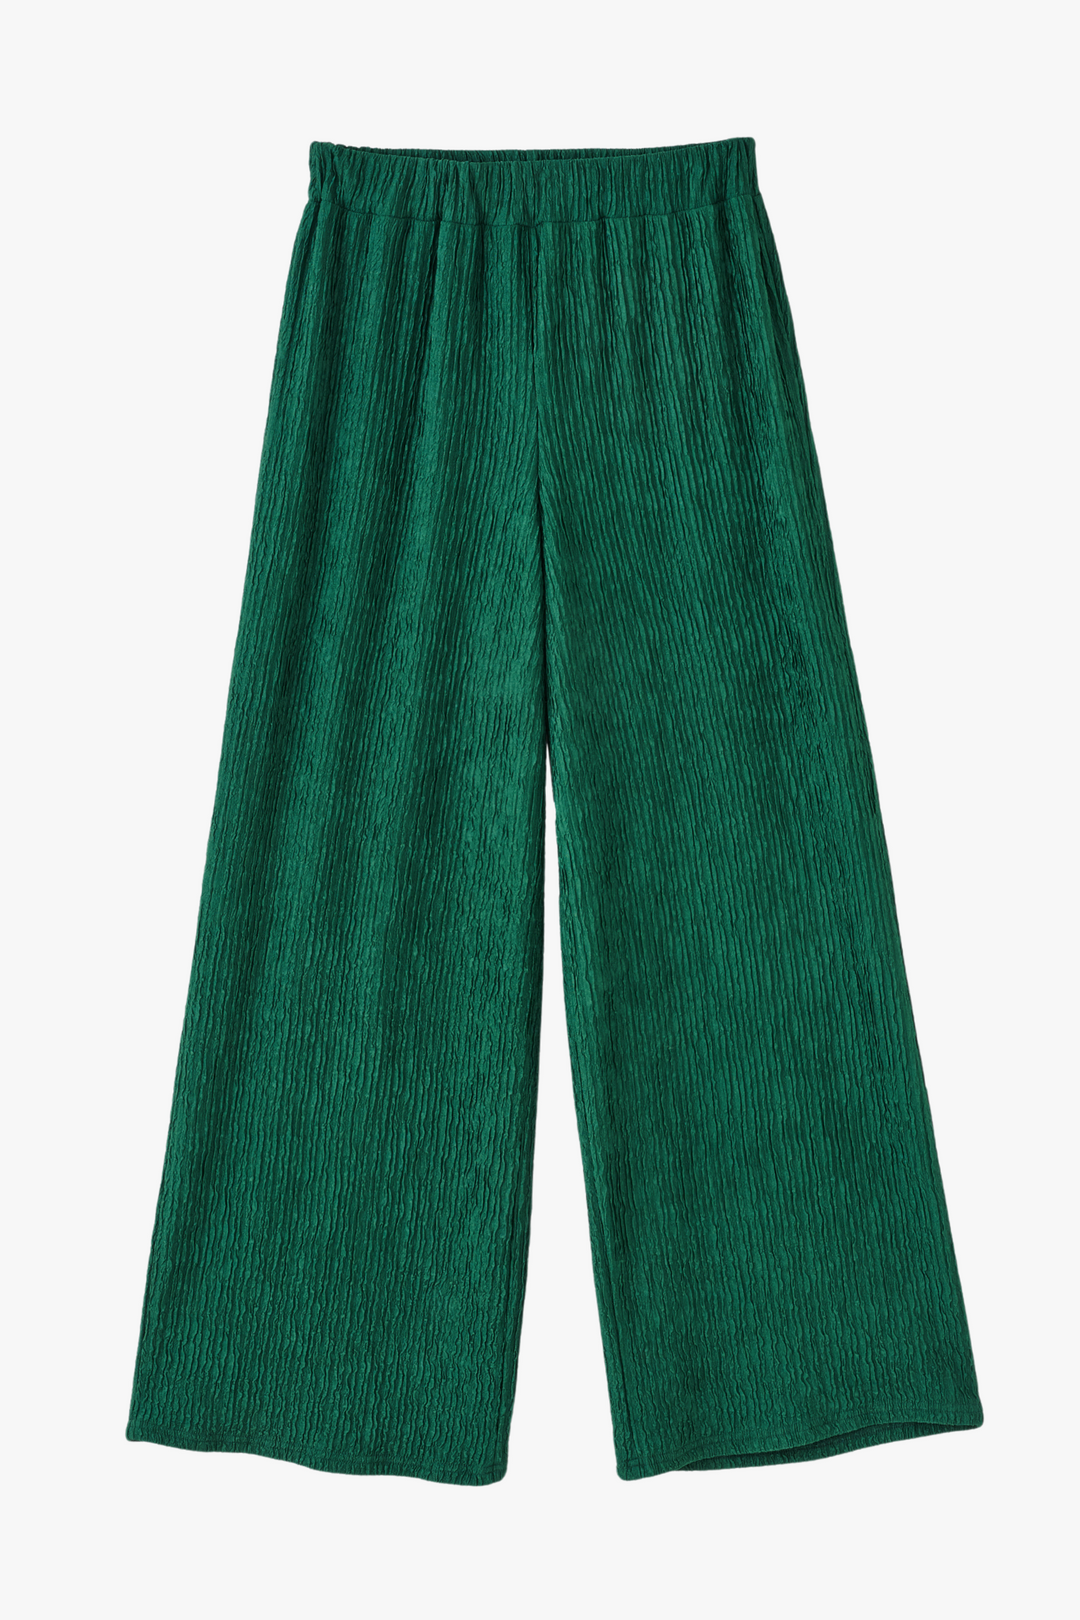 Green Textured Wide Leg Trousers